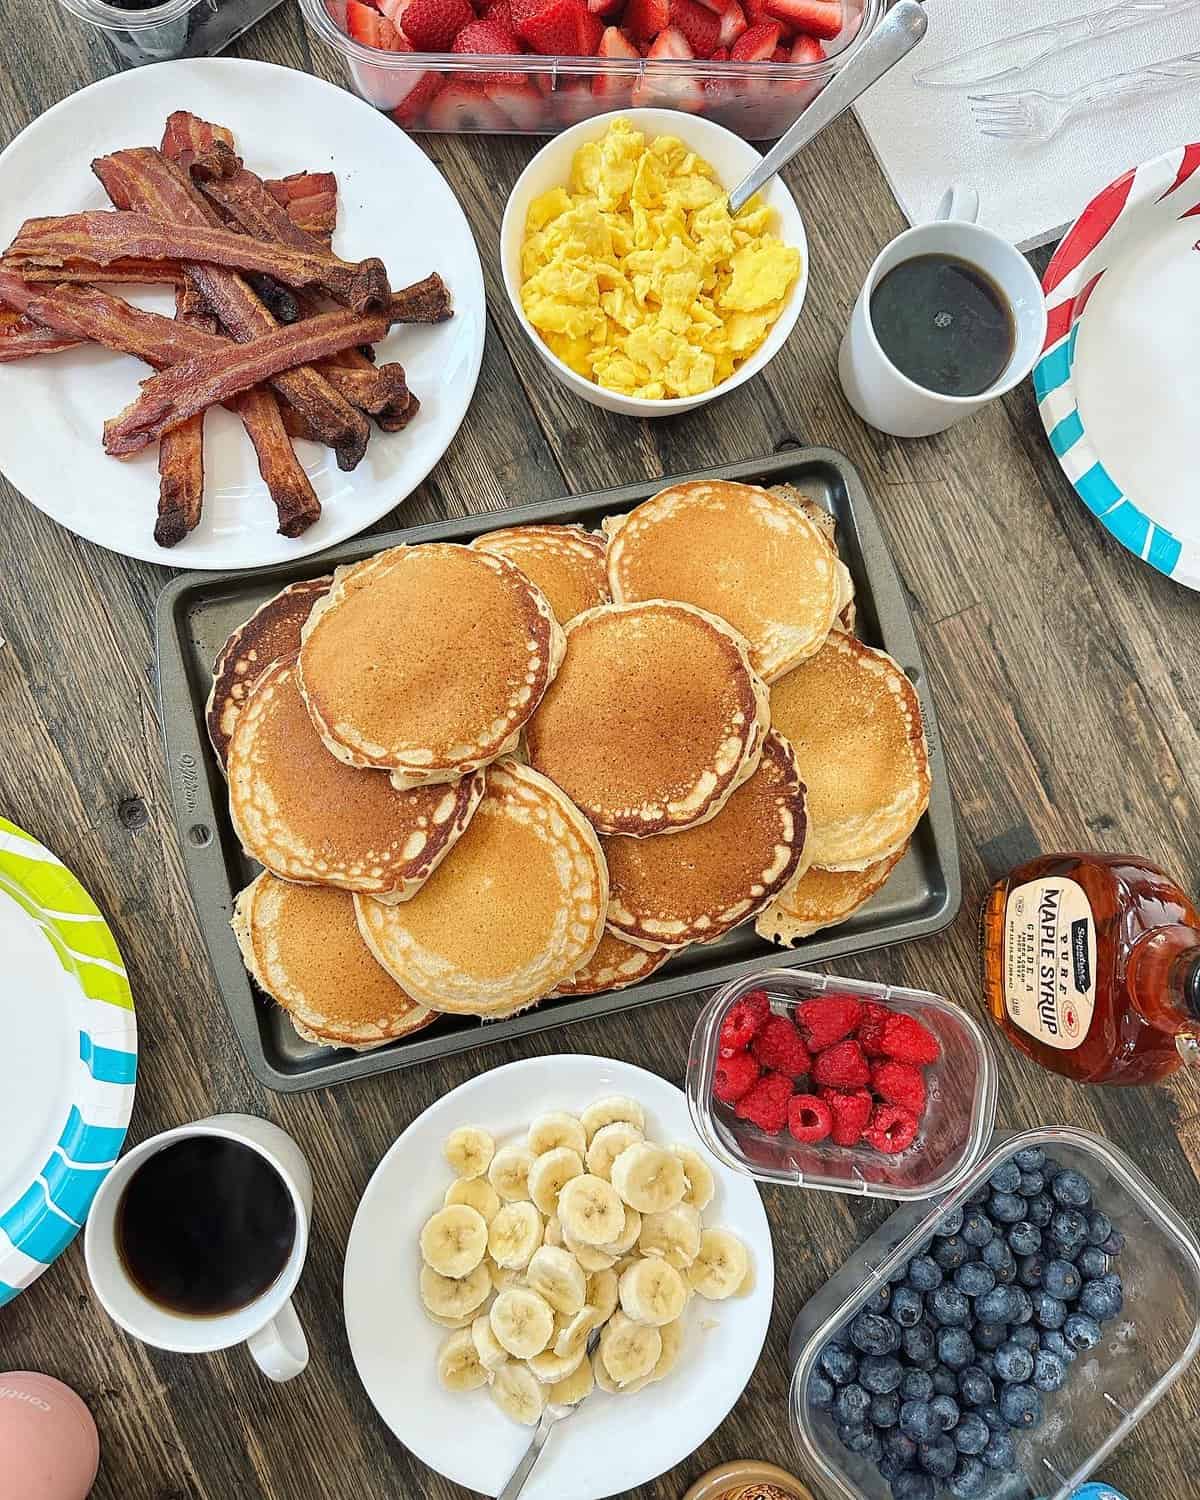 Baked bacon on a white plate, scrambled eggs in a white serving bowl, a baking sheet filled with pancakes and two cups of coffee on a wooden table.